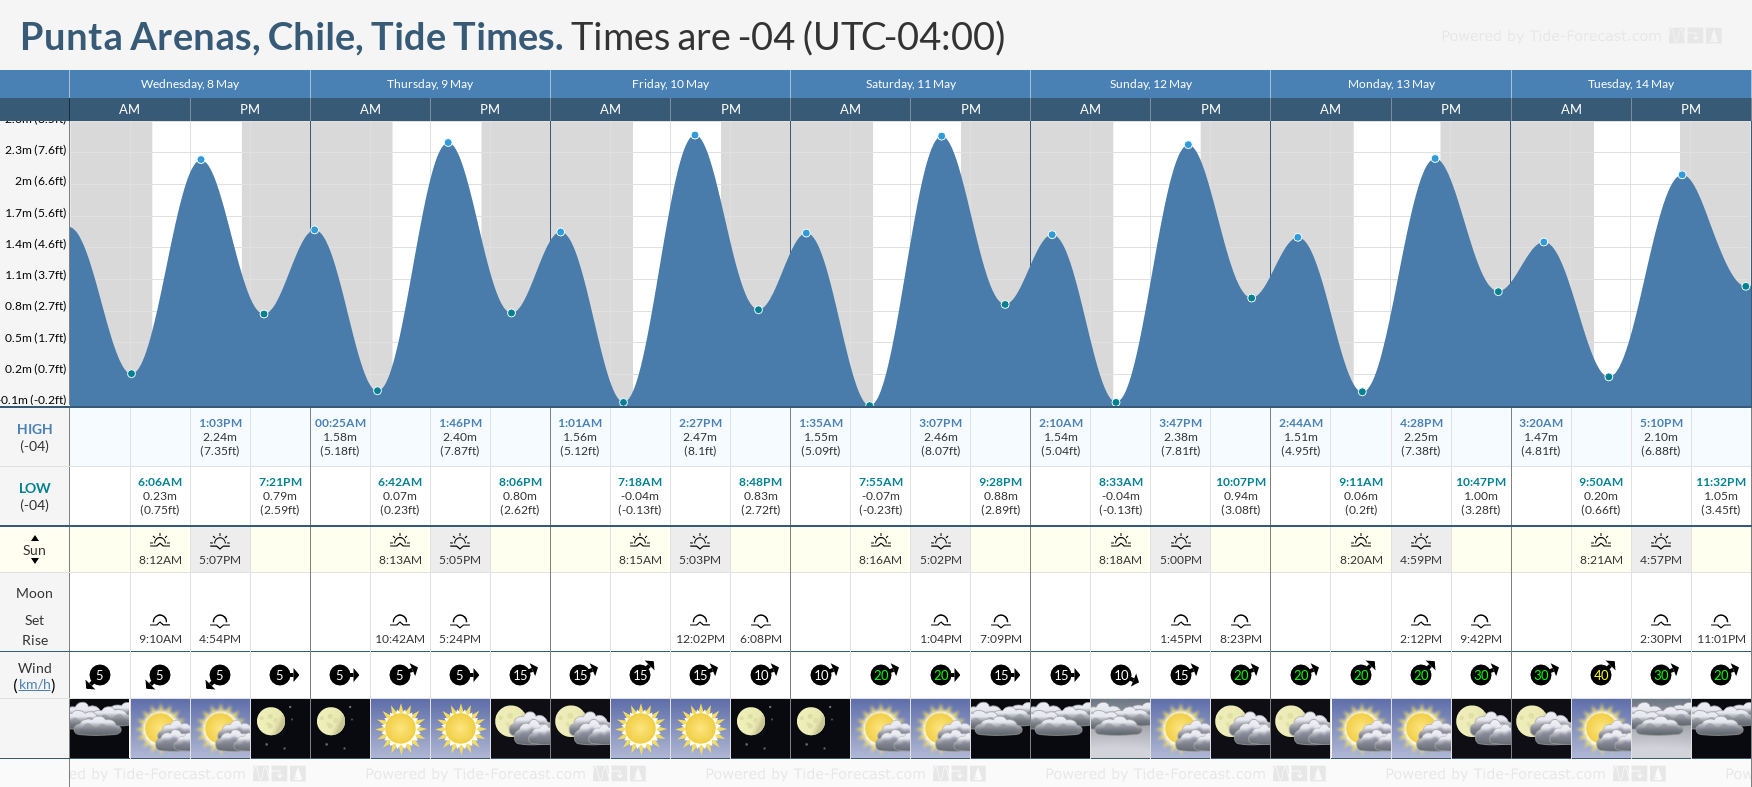 Punta Arenas, Chile Tide Chart including high and low tide times for the next 7 days